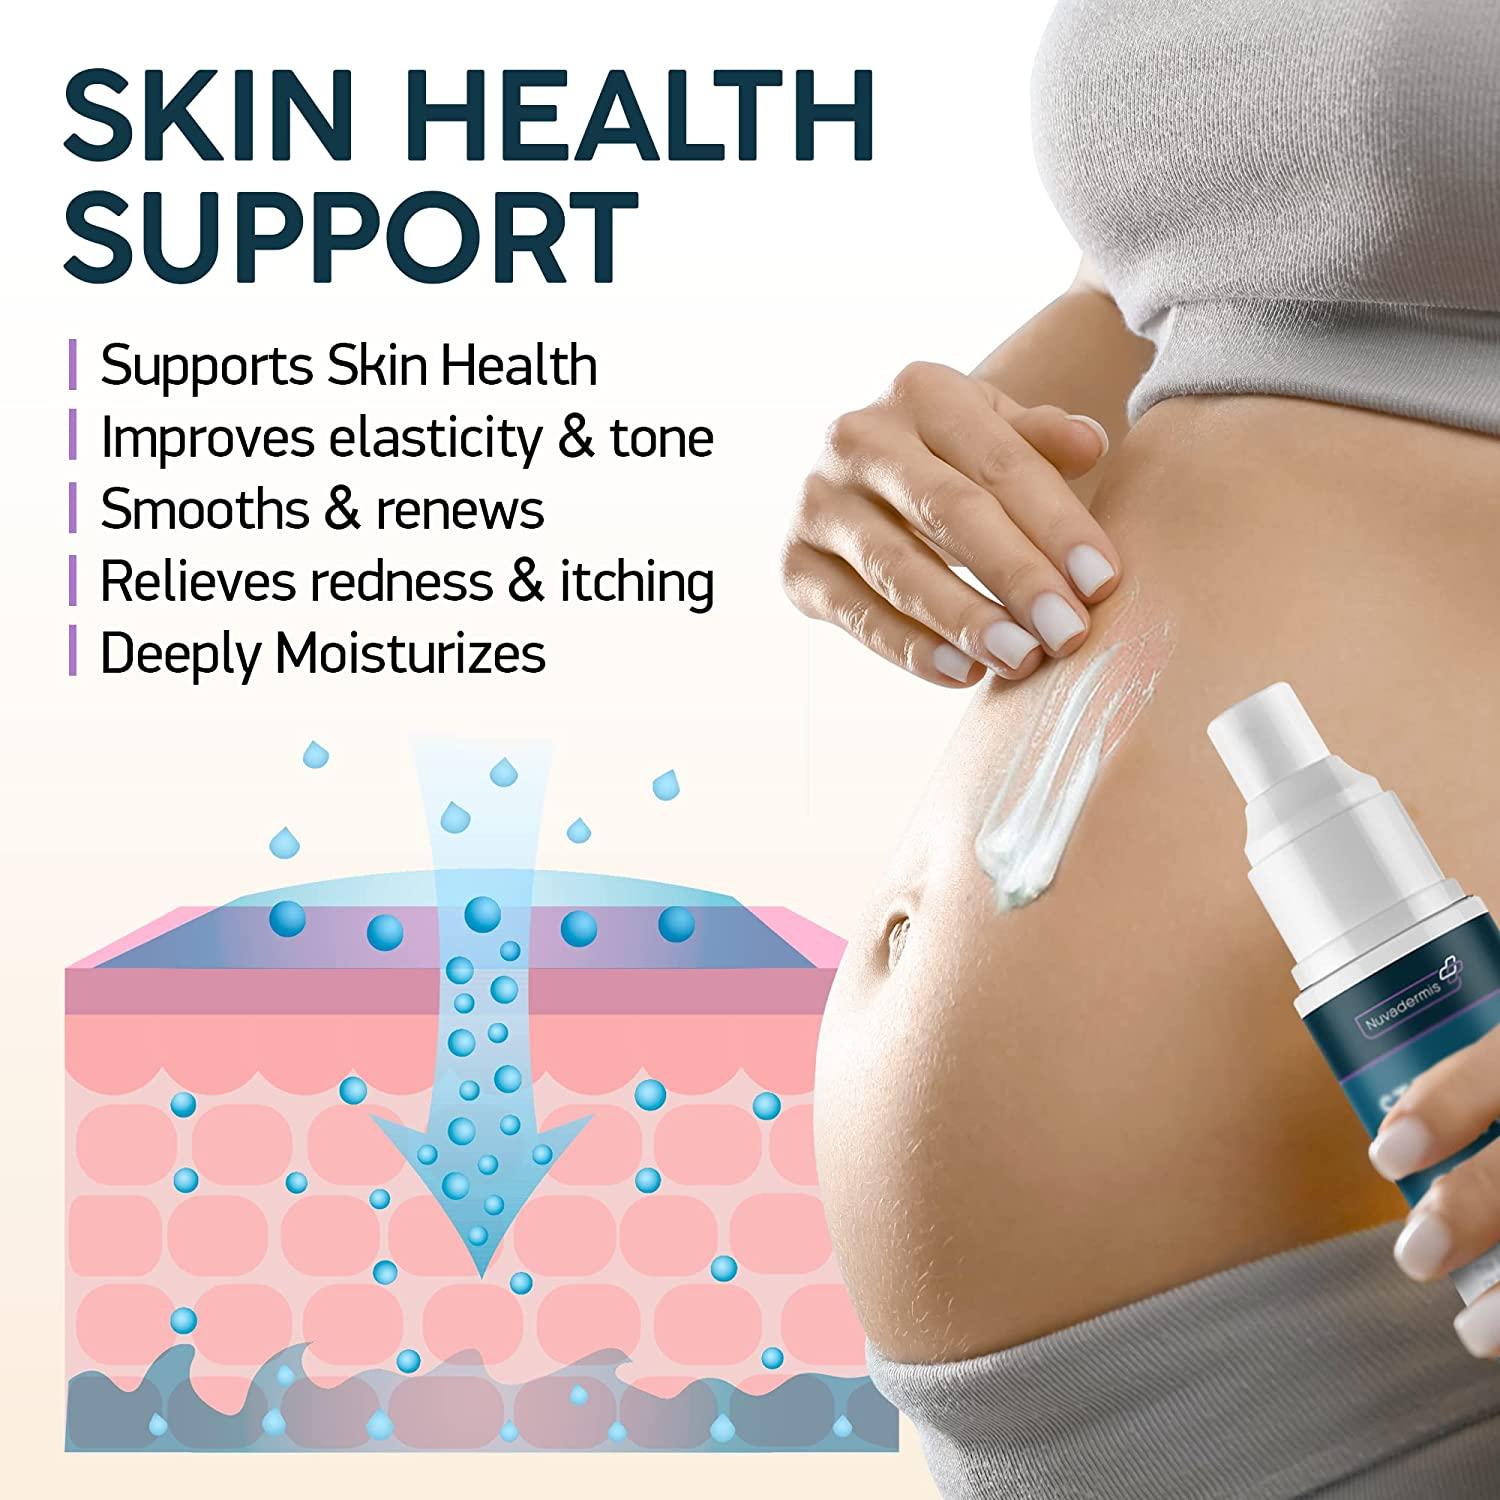 Finding the Best Stretch Mark Cream During Pregnancy